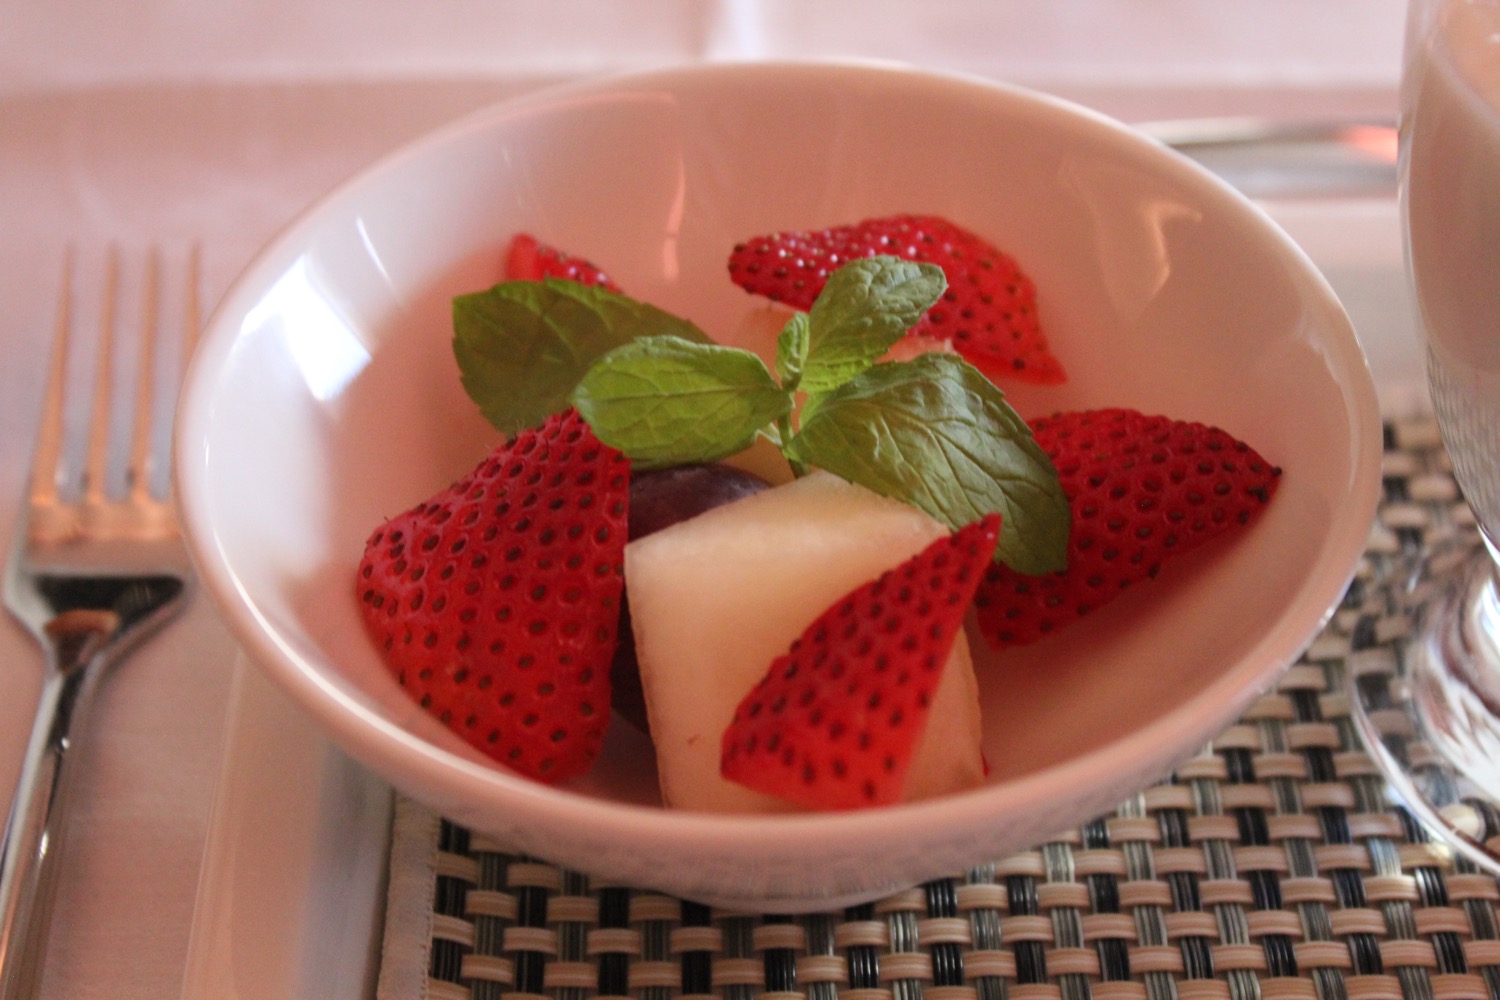 a bowl of fruit with strawberries and mint